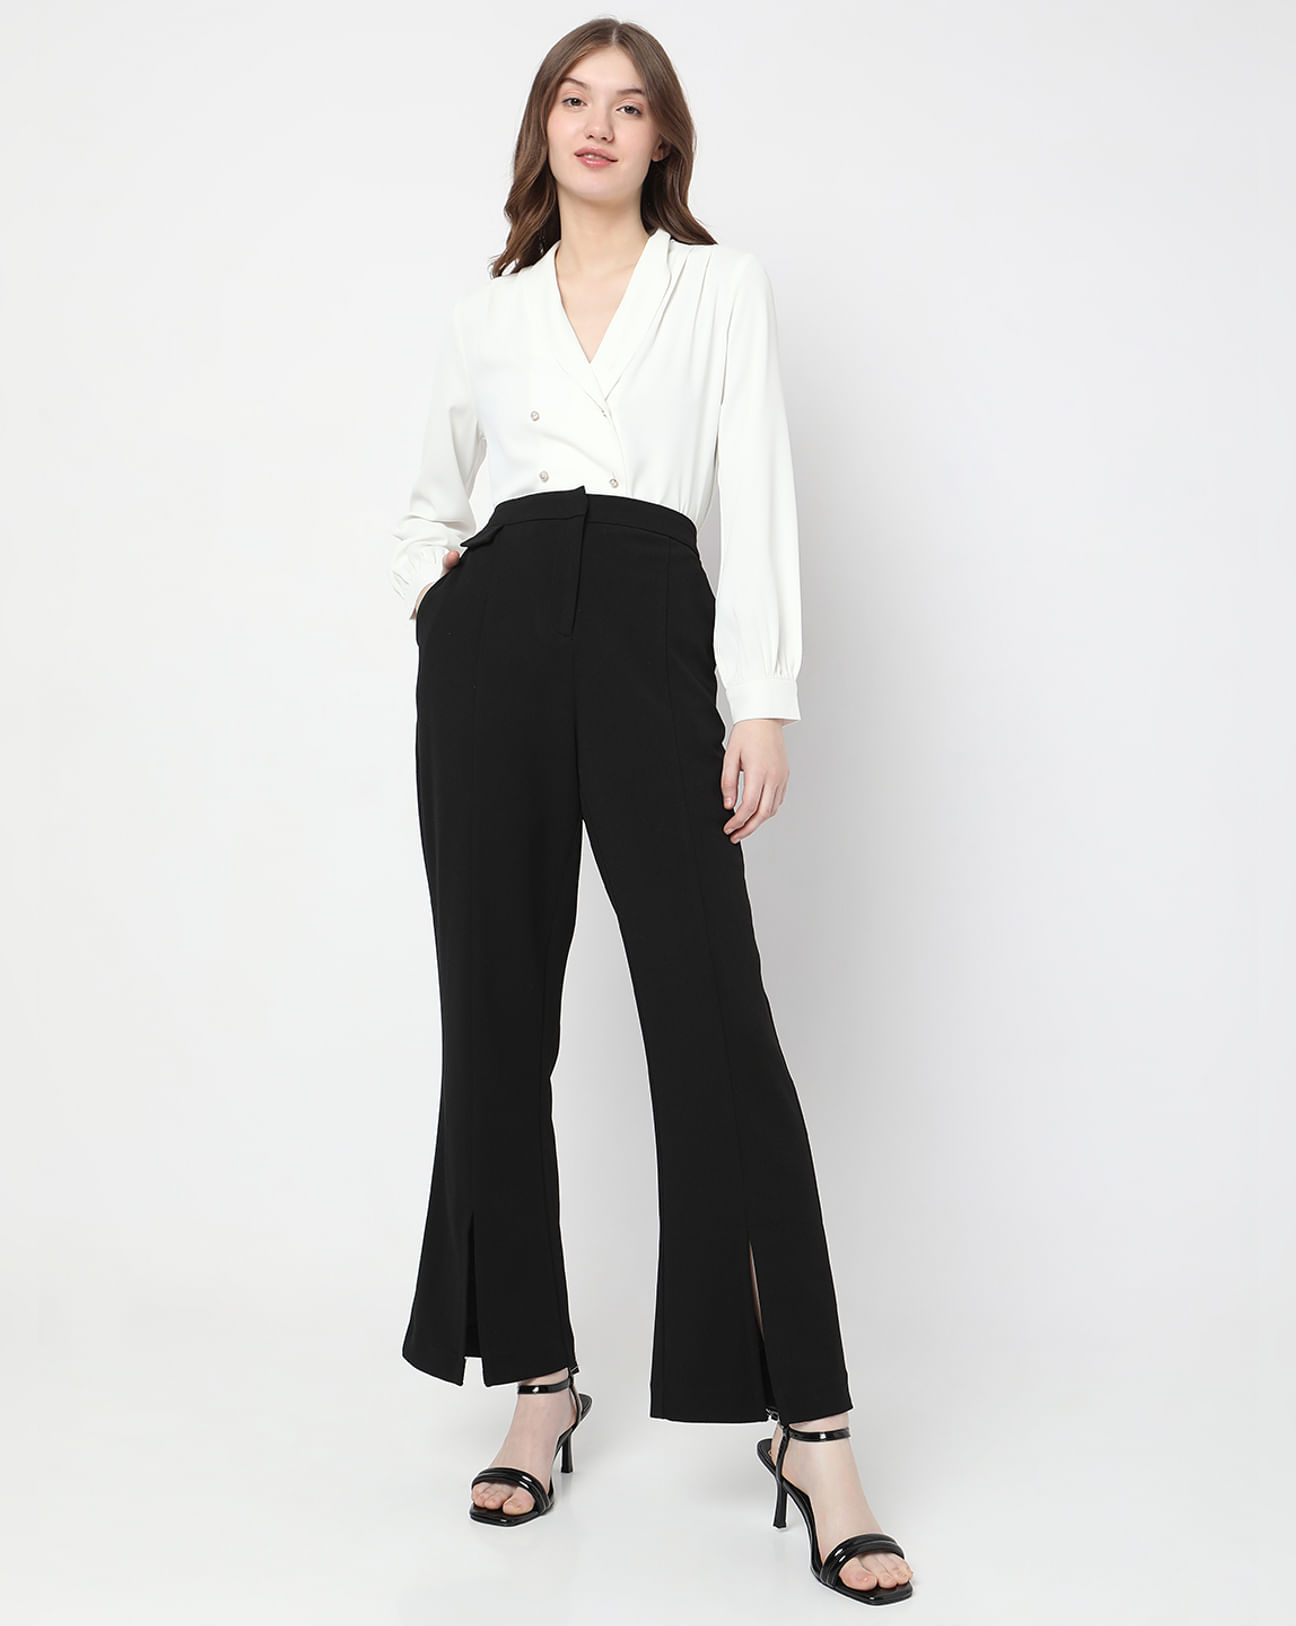 Ankle Slit High Waisted Pant — YELLOW SUB TRADING